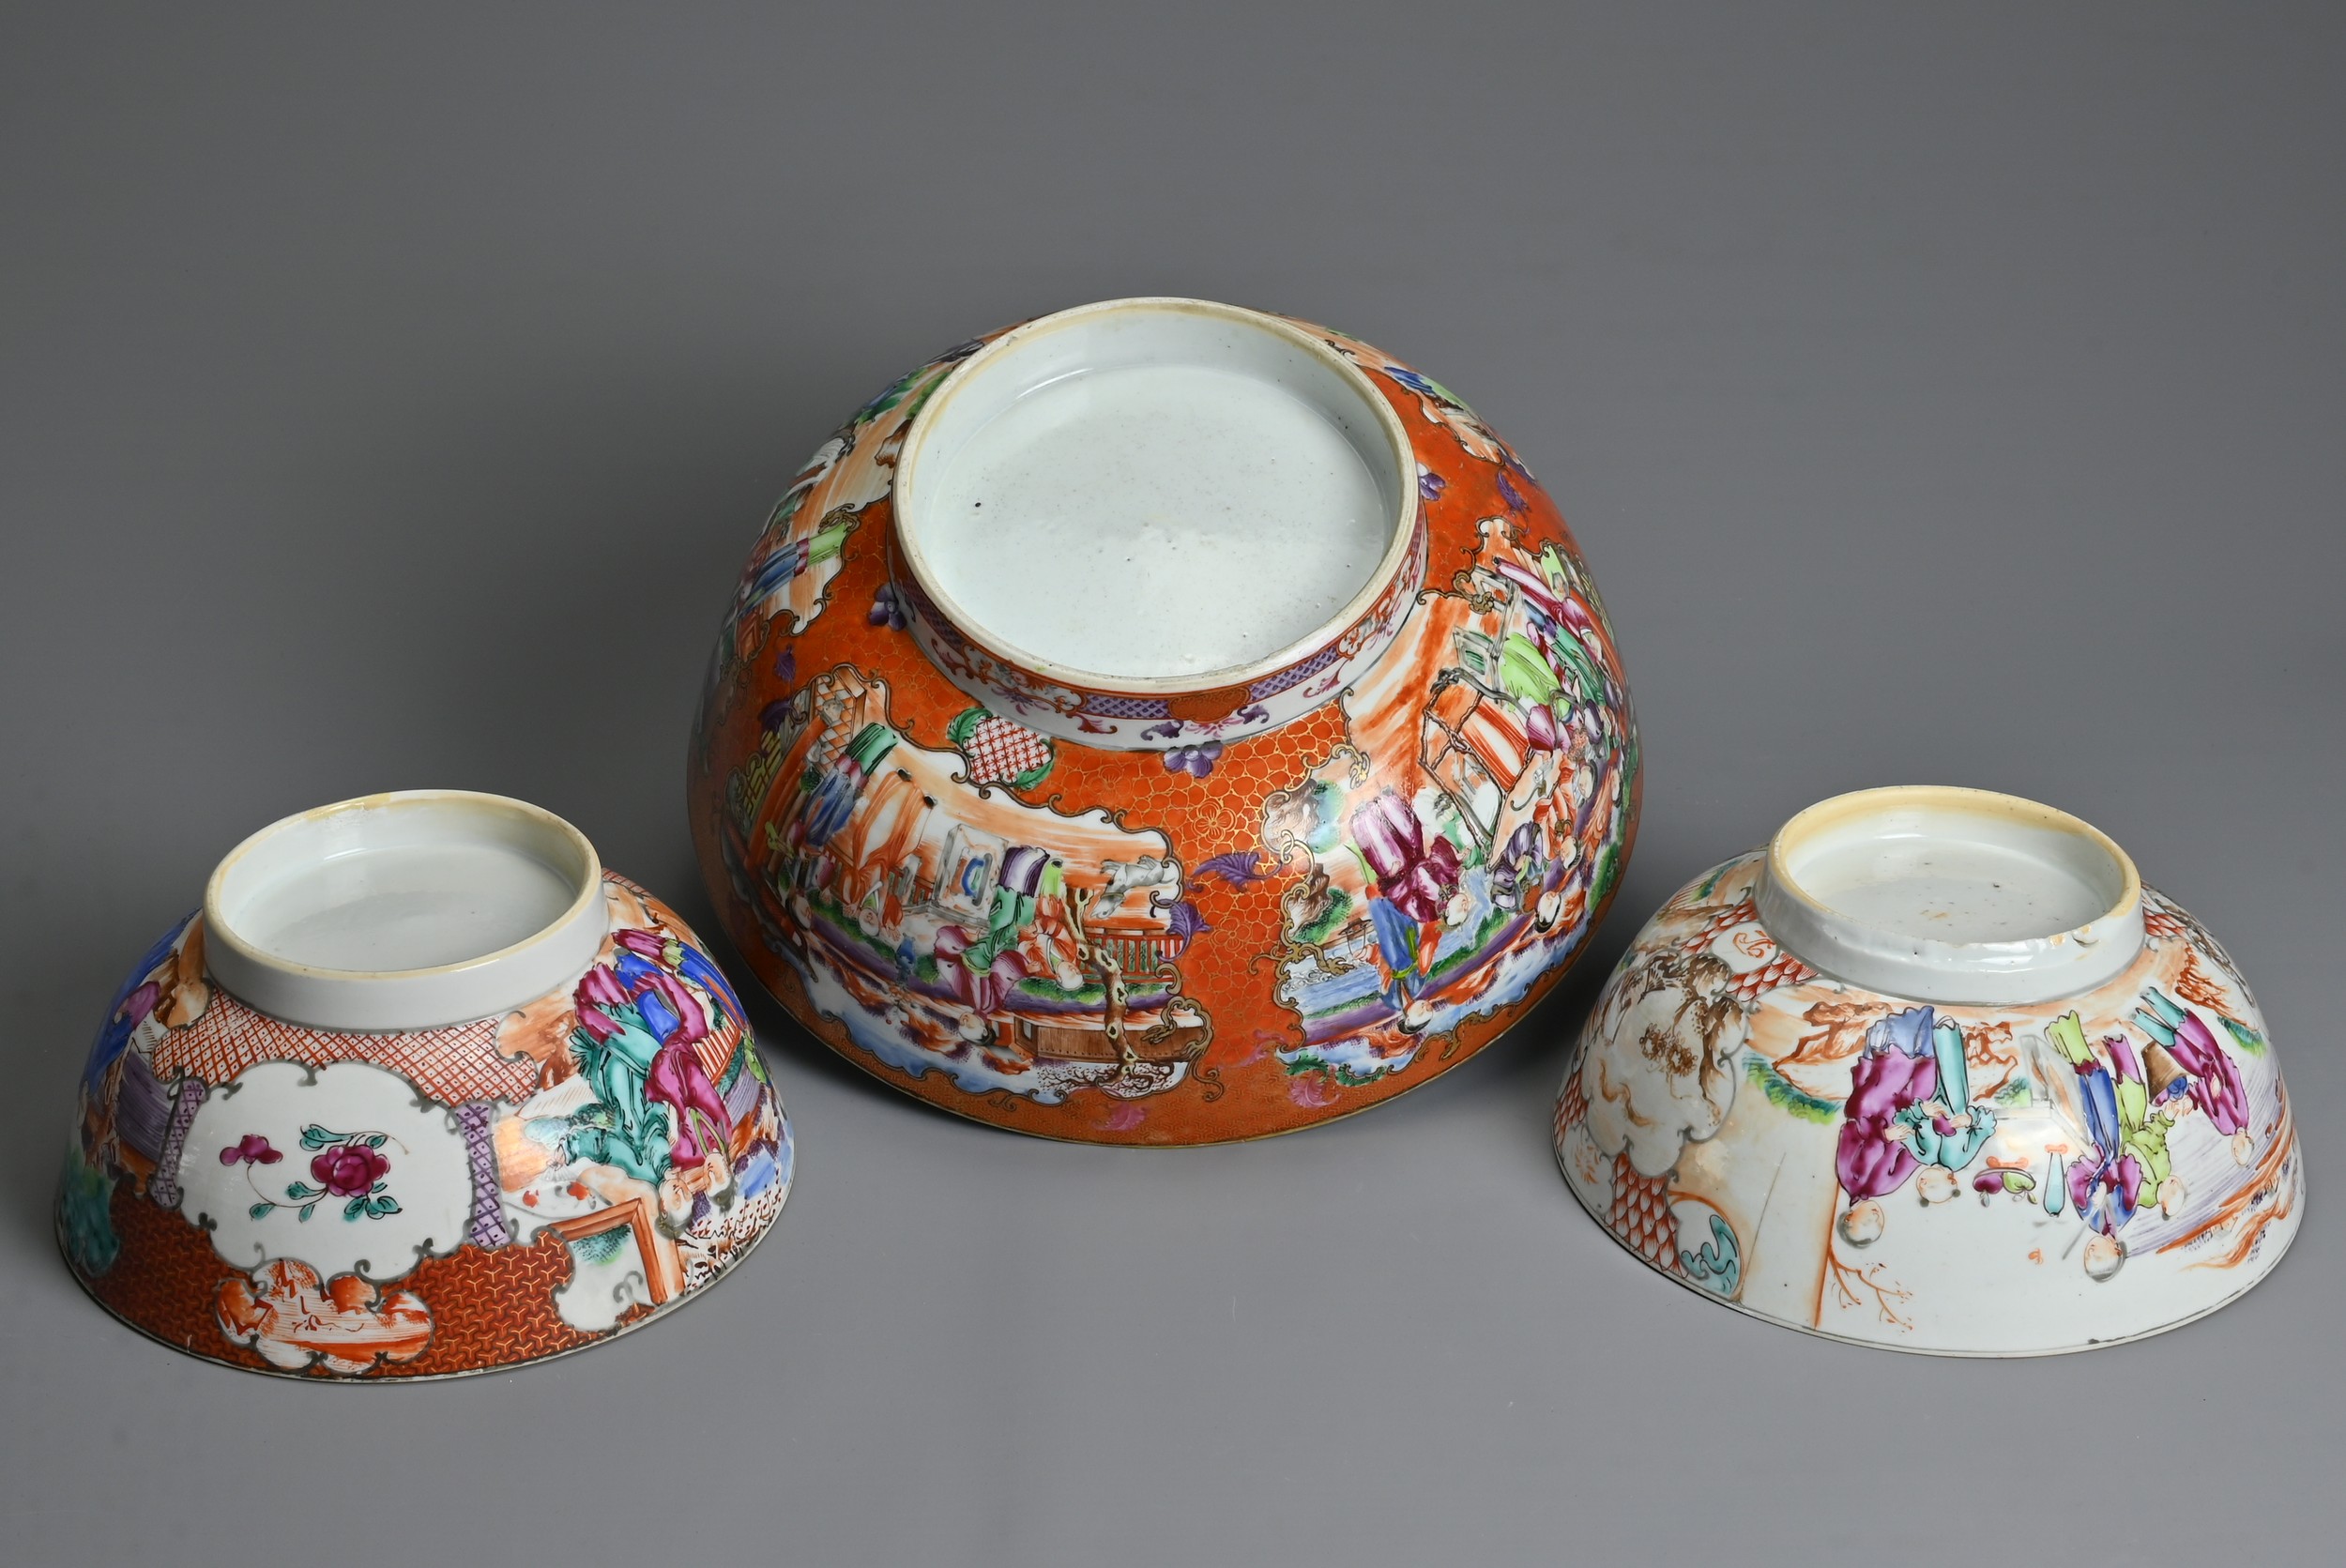 THREE CHINESE FAMILLE ROSE PORCELAIN BOWLS, 18TH CENTURY. Of graduating sizes decorated with various - Image 3 of 6